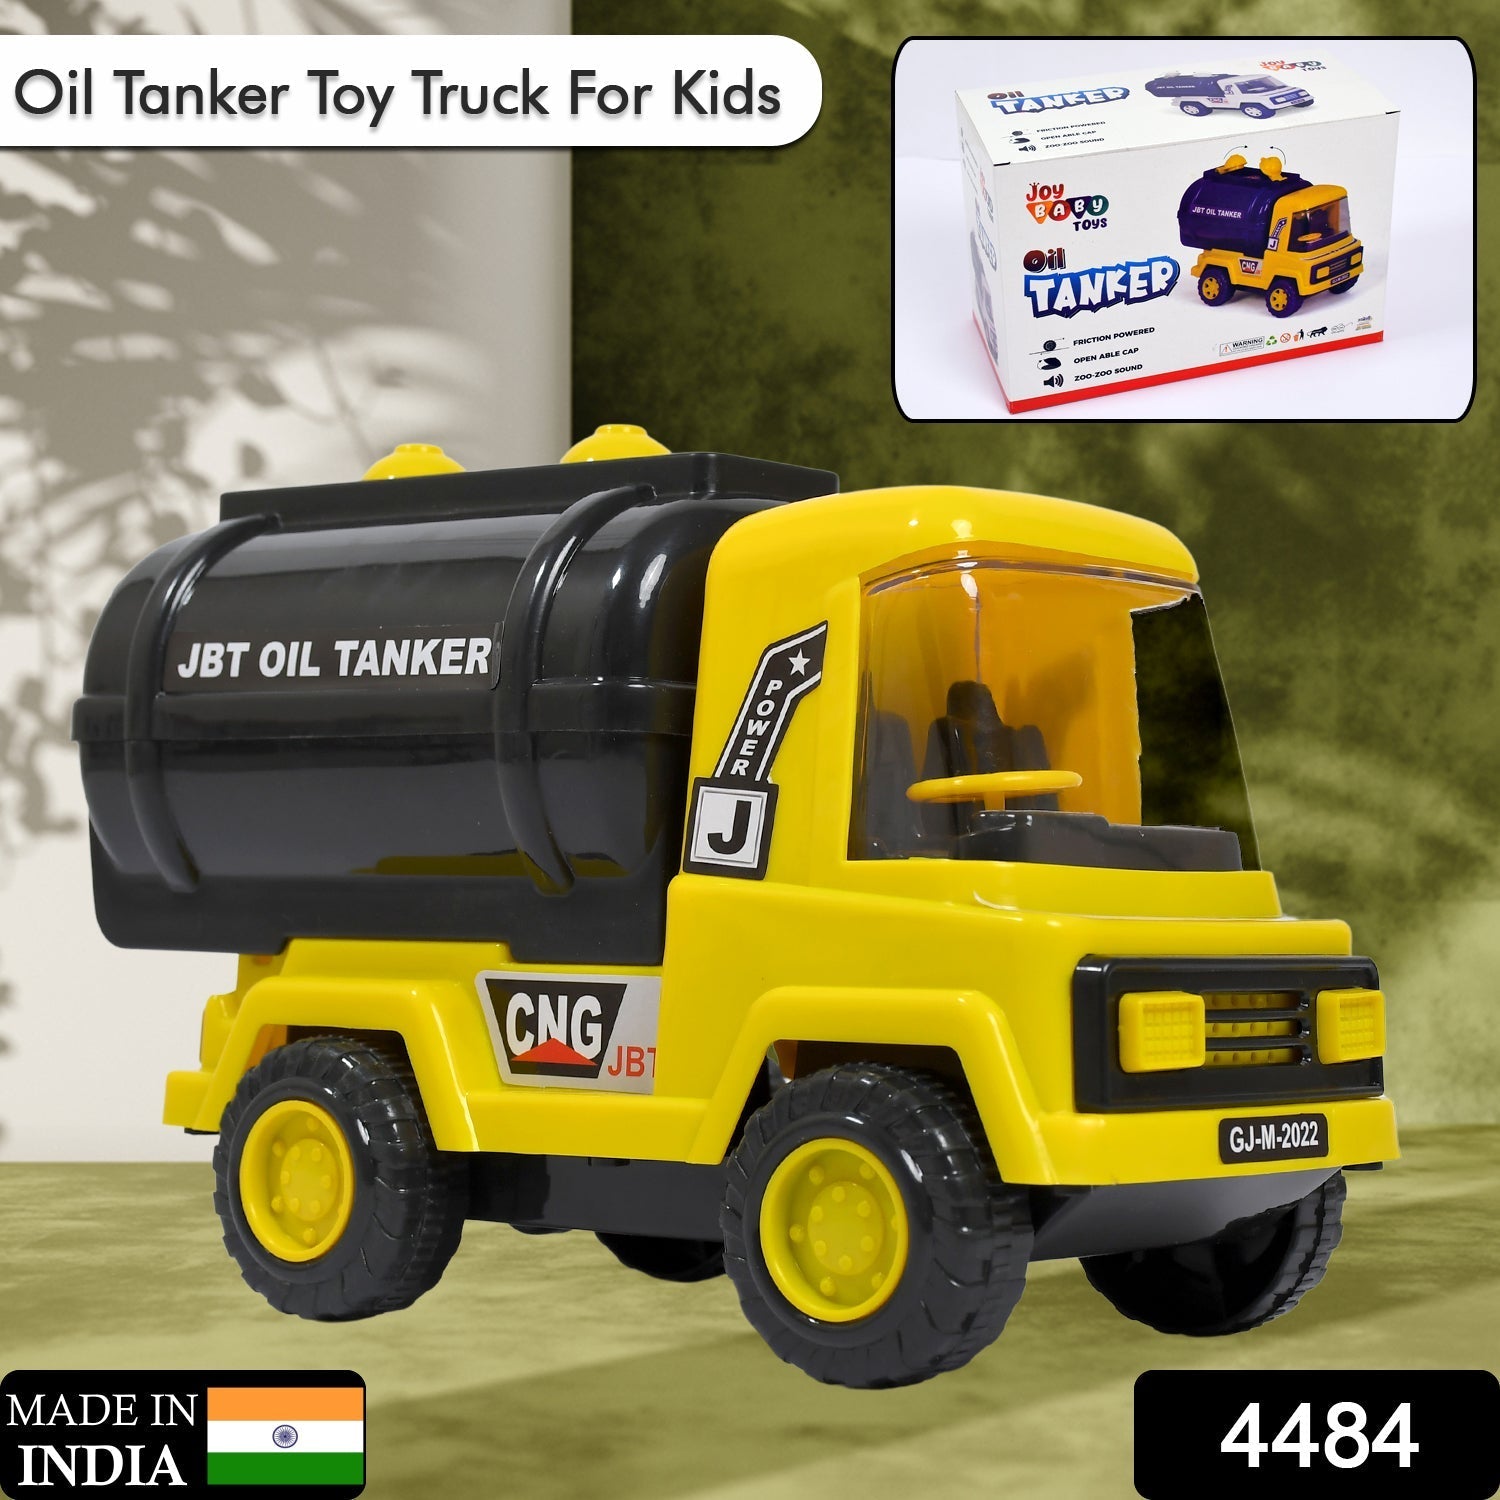 4484 Big Size Heavy Duty Unbreakable Friction Powered with Engine Sound While Running | Non Electric Toy |Tempo Oil - Water Tanker Vehicle Truck for Kids Size 